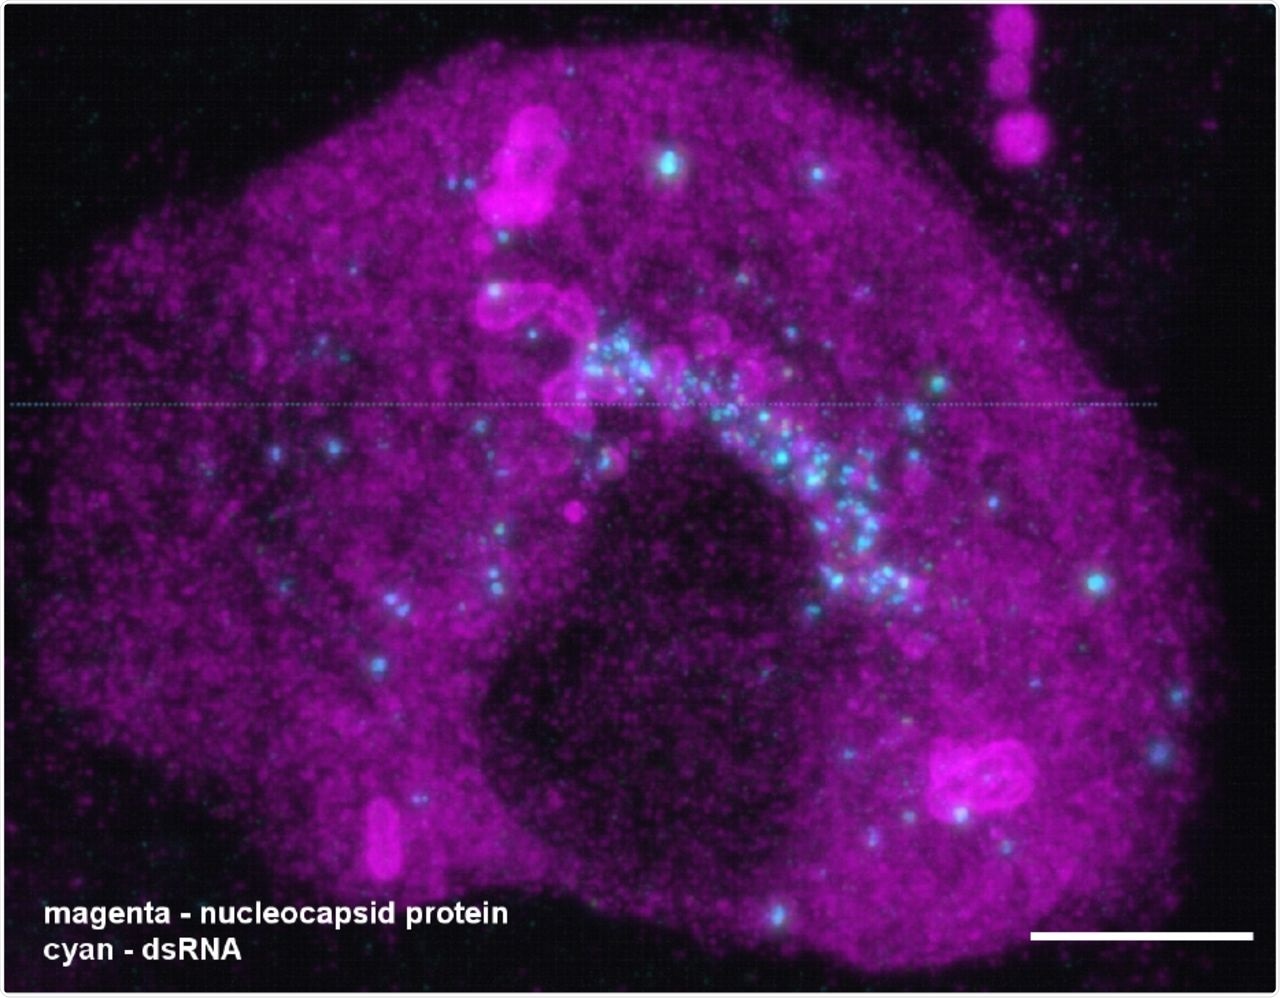 A combination of expansion and light sheet microscopy reveals the interaction between dsRNA (cyan) and the nucleocapsid protein N (magenta) in SARS-CoV-2 infected Vero cells. The video corresponds to Figure 3G in the main manuscript. The majority of dsRNA foci are located in a region immediately adjacent to the nucleus. In addition, most N compartments contain dsRNA foci sitting in the layers of the compartments. Scale bar 5 μm (taking into account an expansion factor of 4.2).